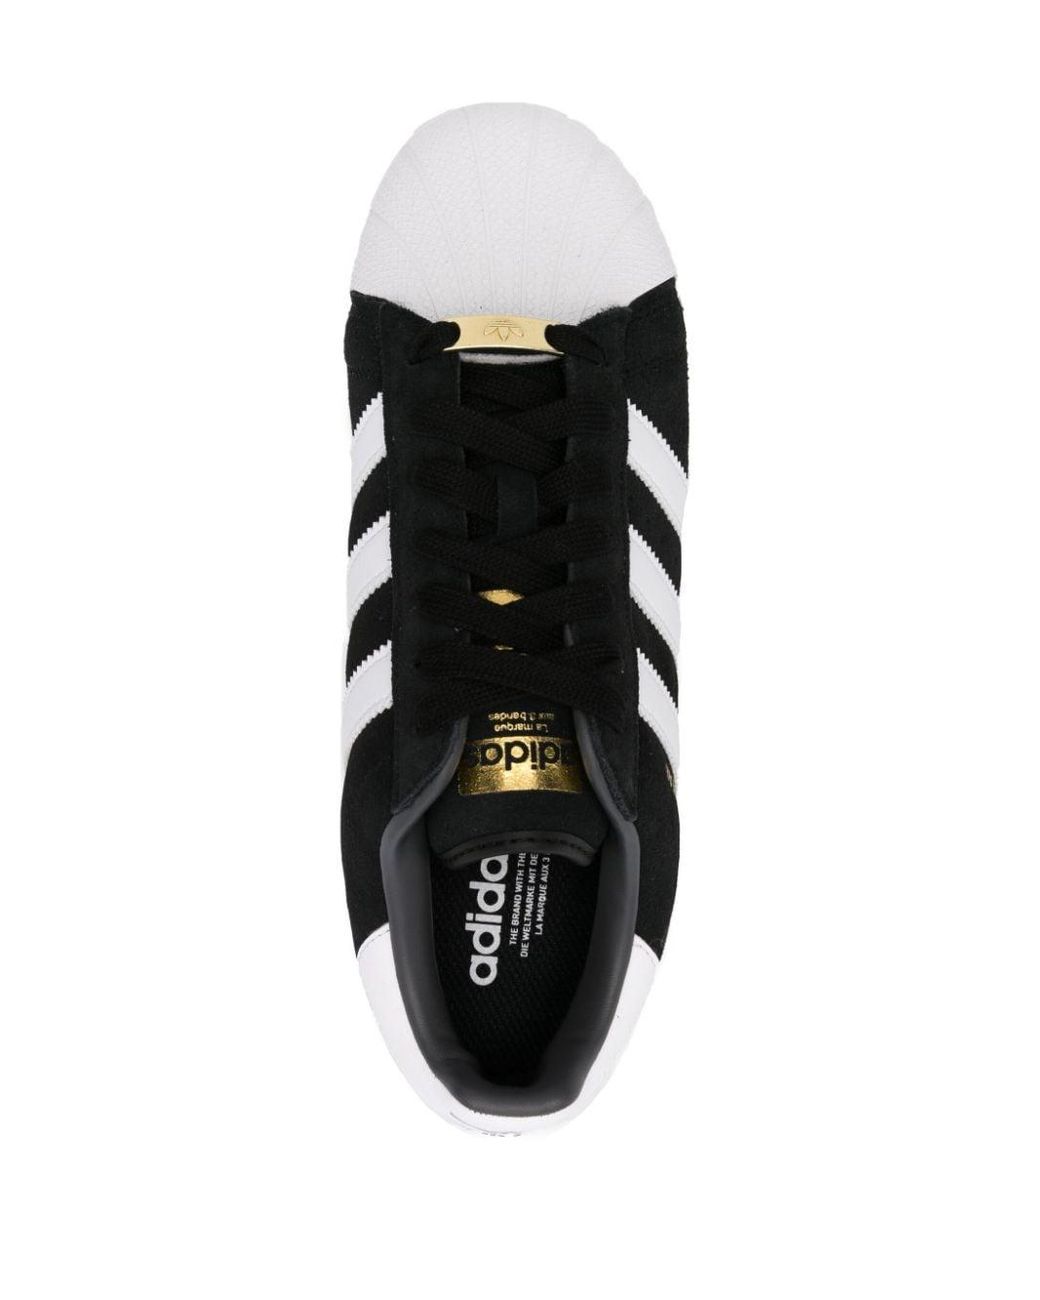 adidas Superstar Xlg Suede Leather Sneakers in Black | Lyst